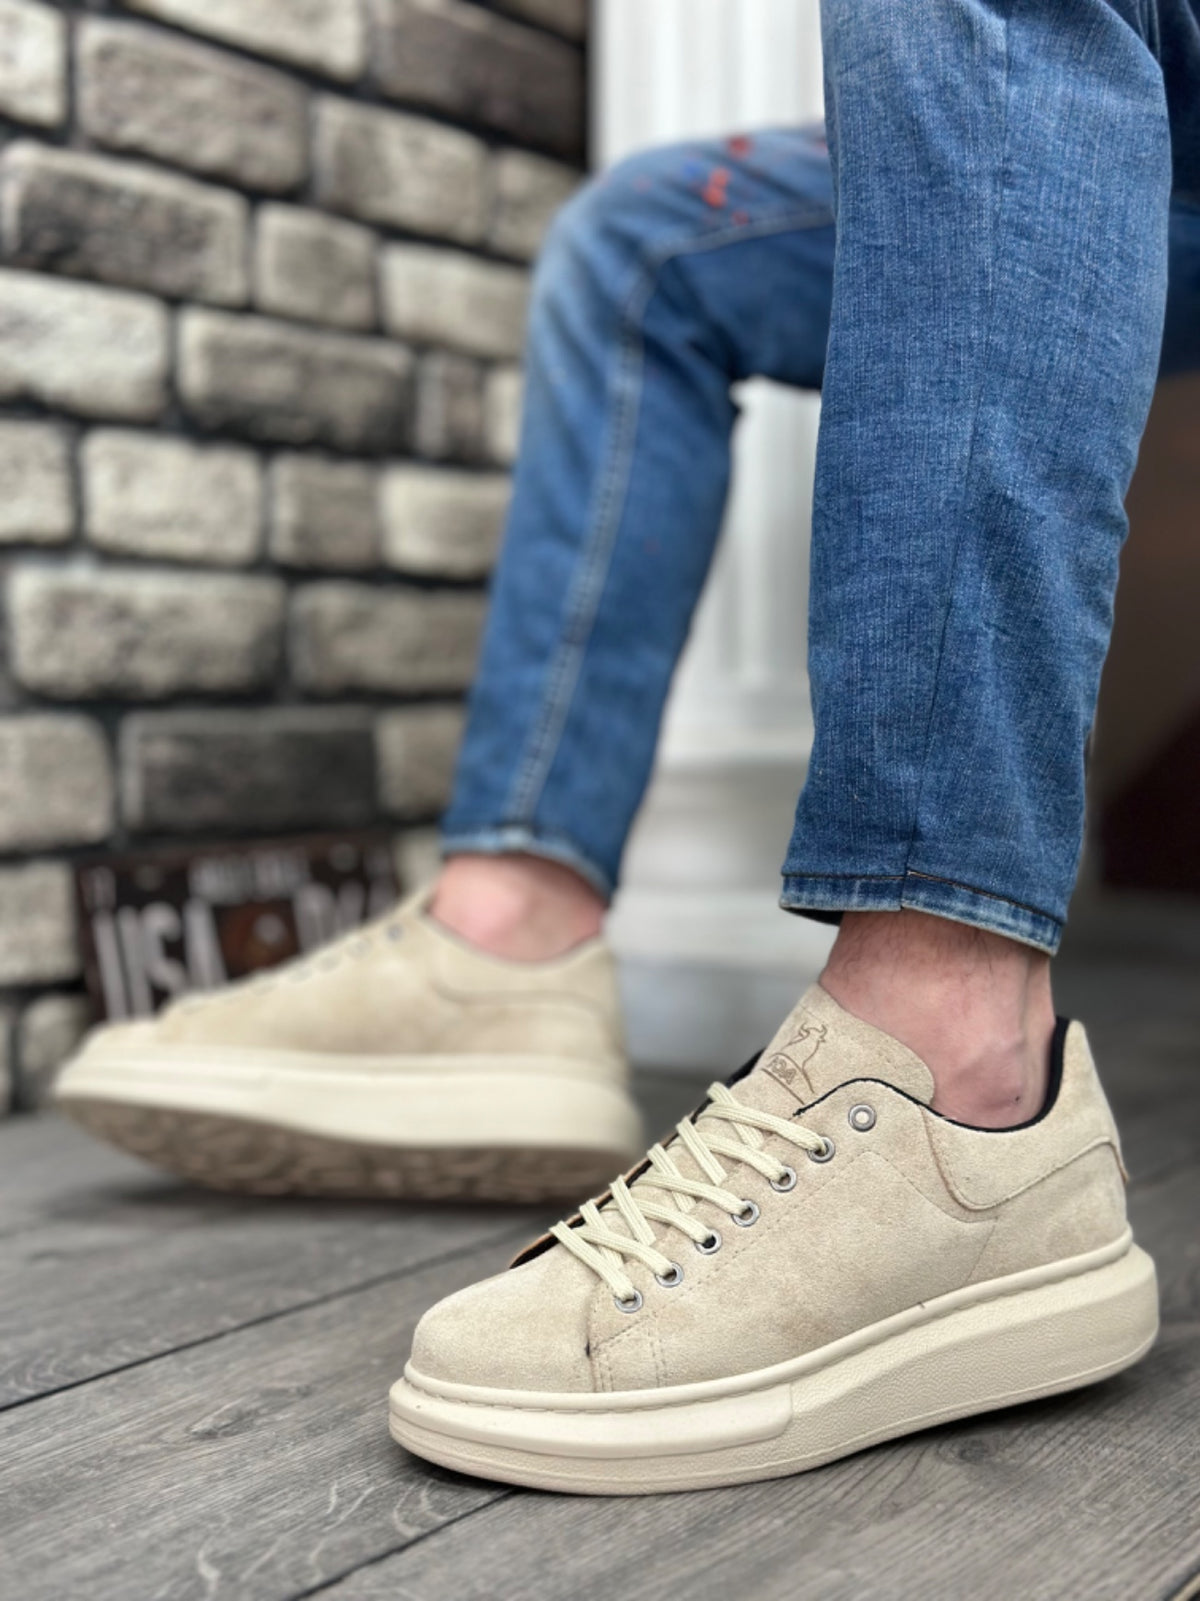 BA0547 Thick High Cream Sole Cream Suede Lace-Up Sports Men's Shoes - STREETMODE ™